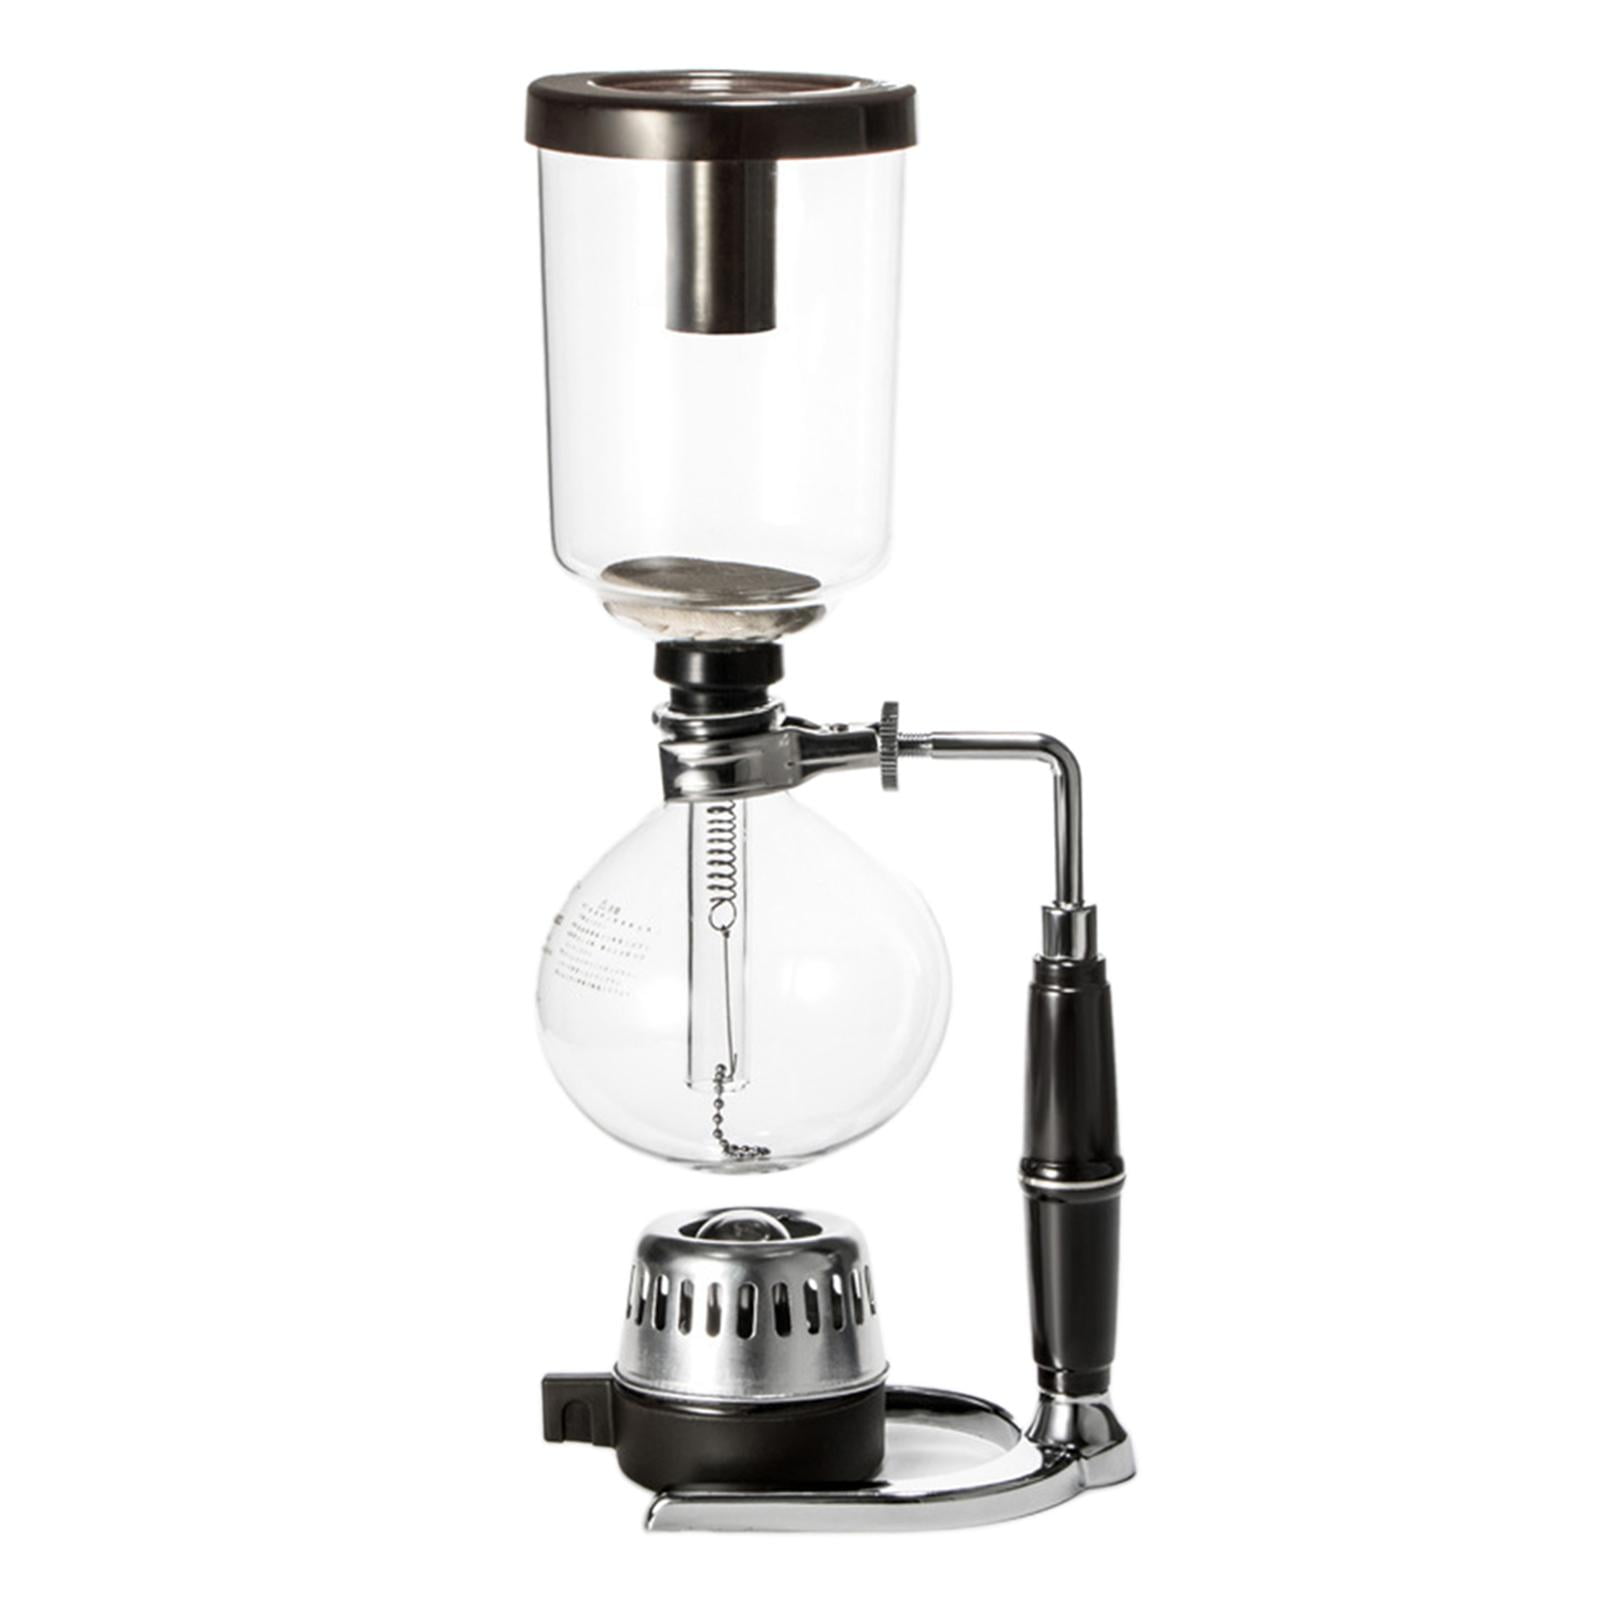 High Quality Syphon Vacuum Coffee Maker Coffee Siphon Maker Siphon Sprate Upper Pots Coffee Percolators Parts 3Cup Upper Clear 